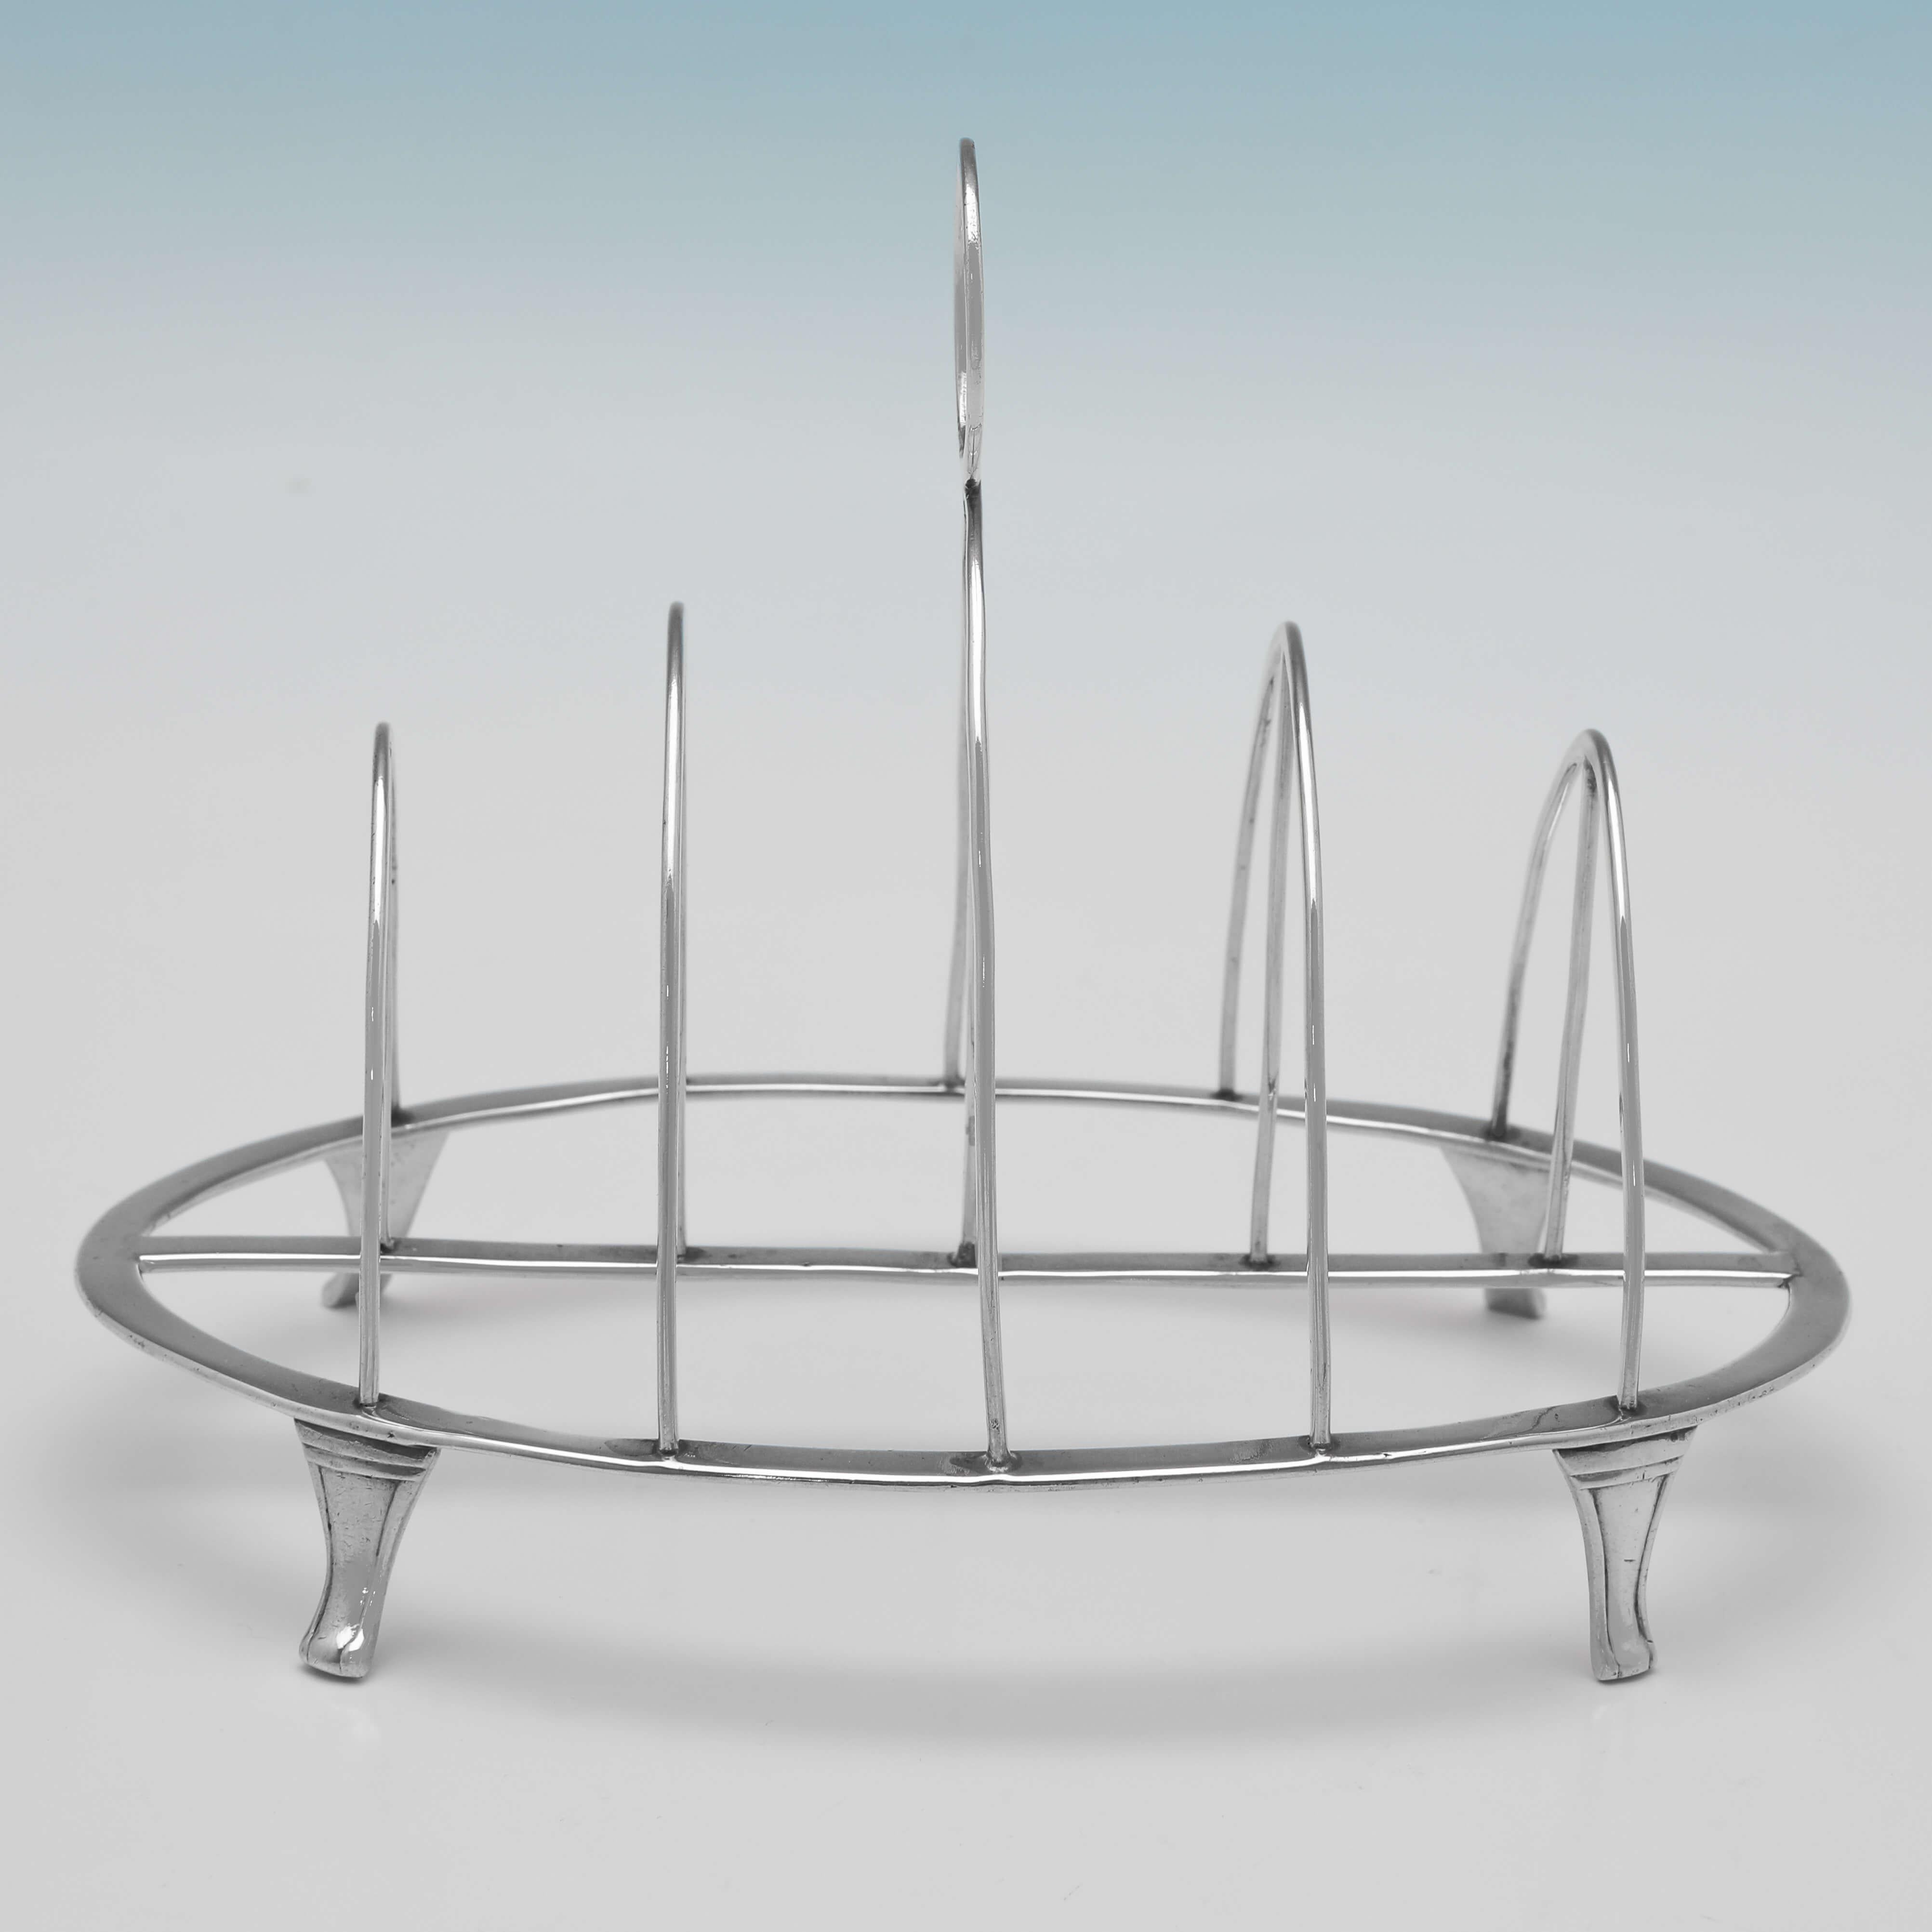 Hallmarked in London in 1812 by Samuel Hennell, this handsome, Regency Period, Antique Sterling Silver Toast Rack, is plain in design, and will hold 4 slices of toast. 

The toast rack measures 5